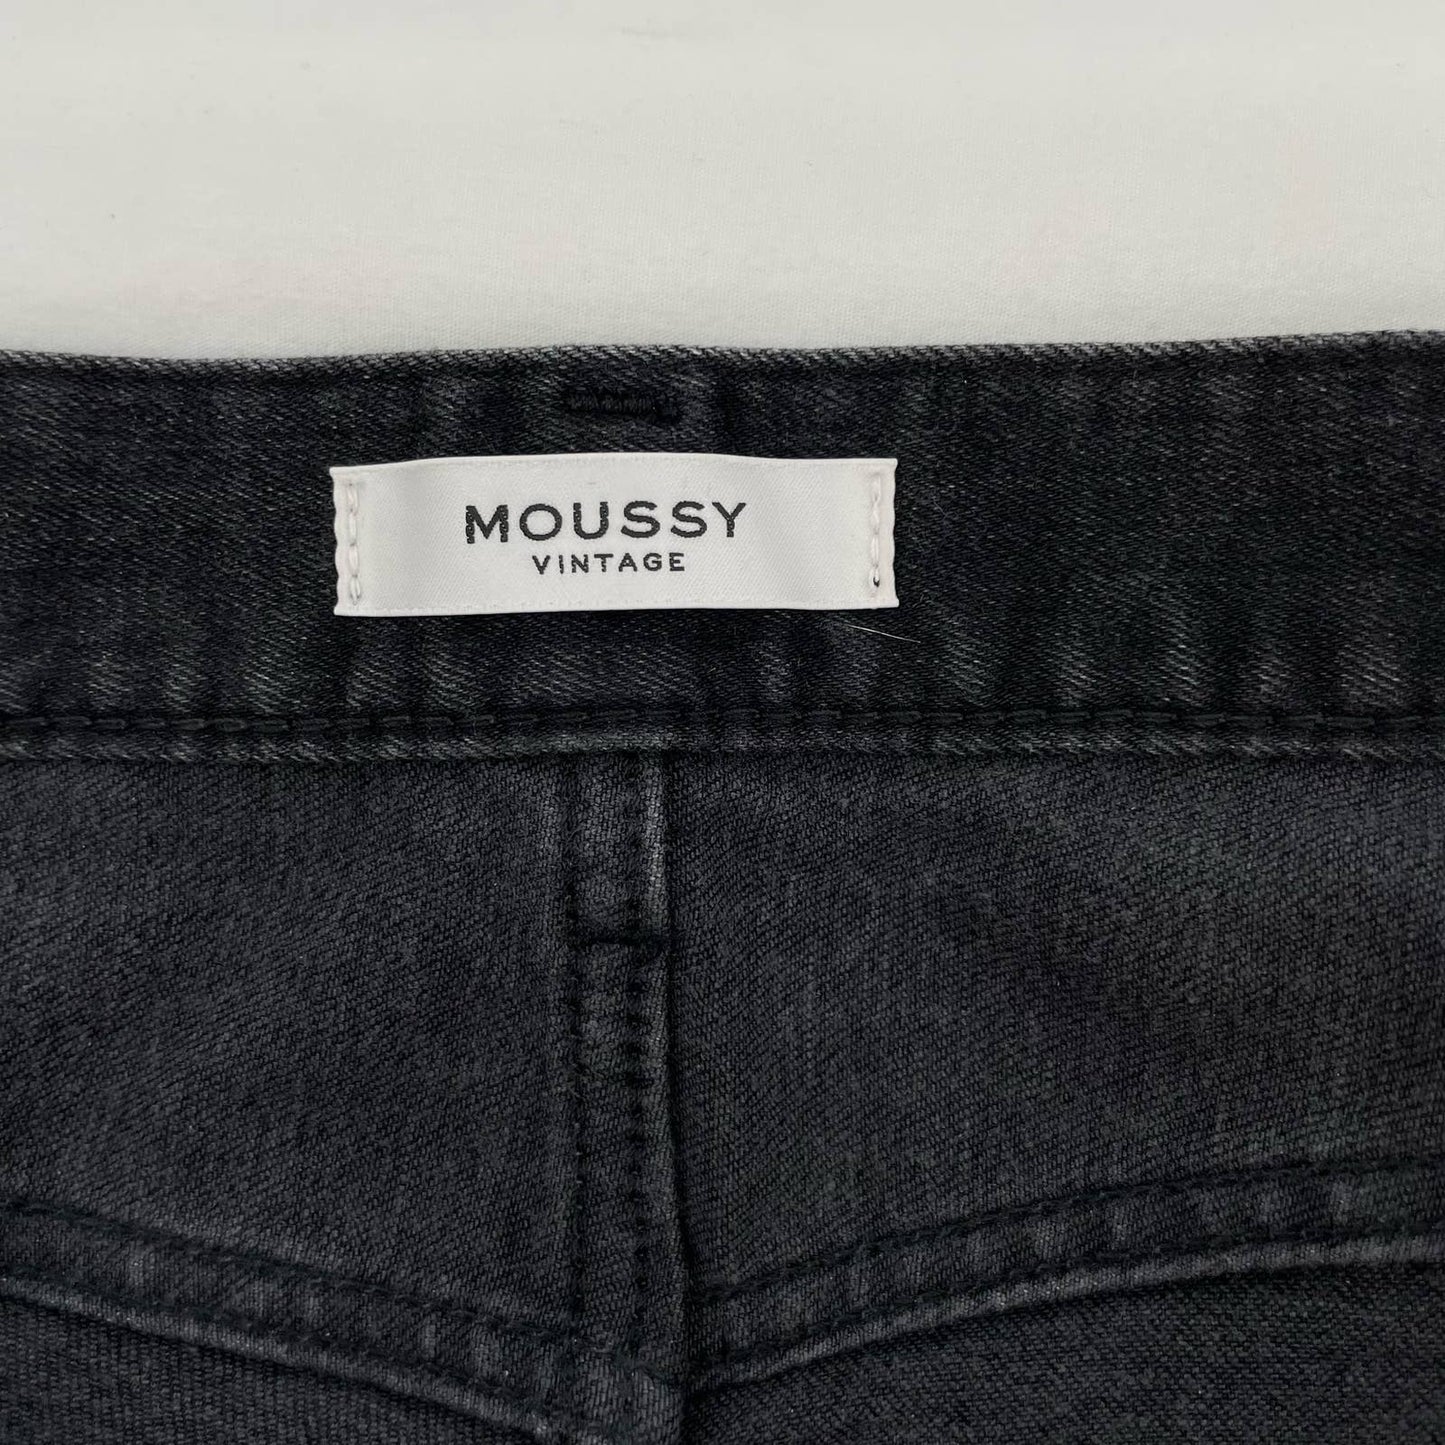 Moussy Vintage Black Jeans Distressed Straight Style 025EAC12-1220-1 Size 29